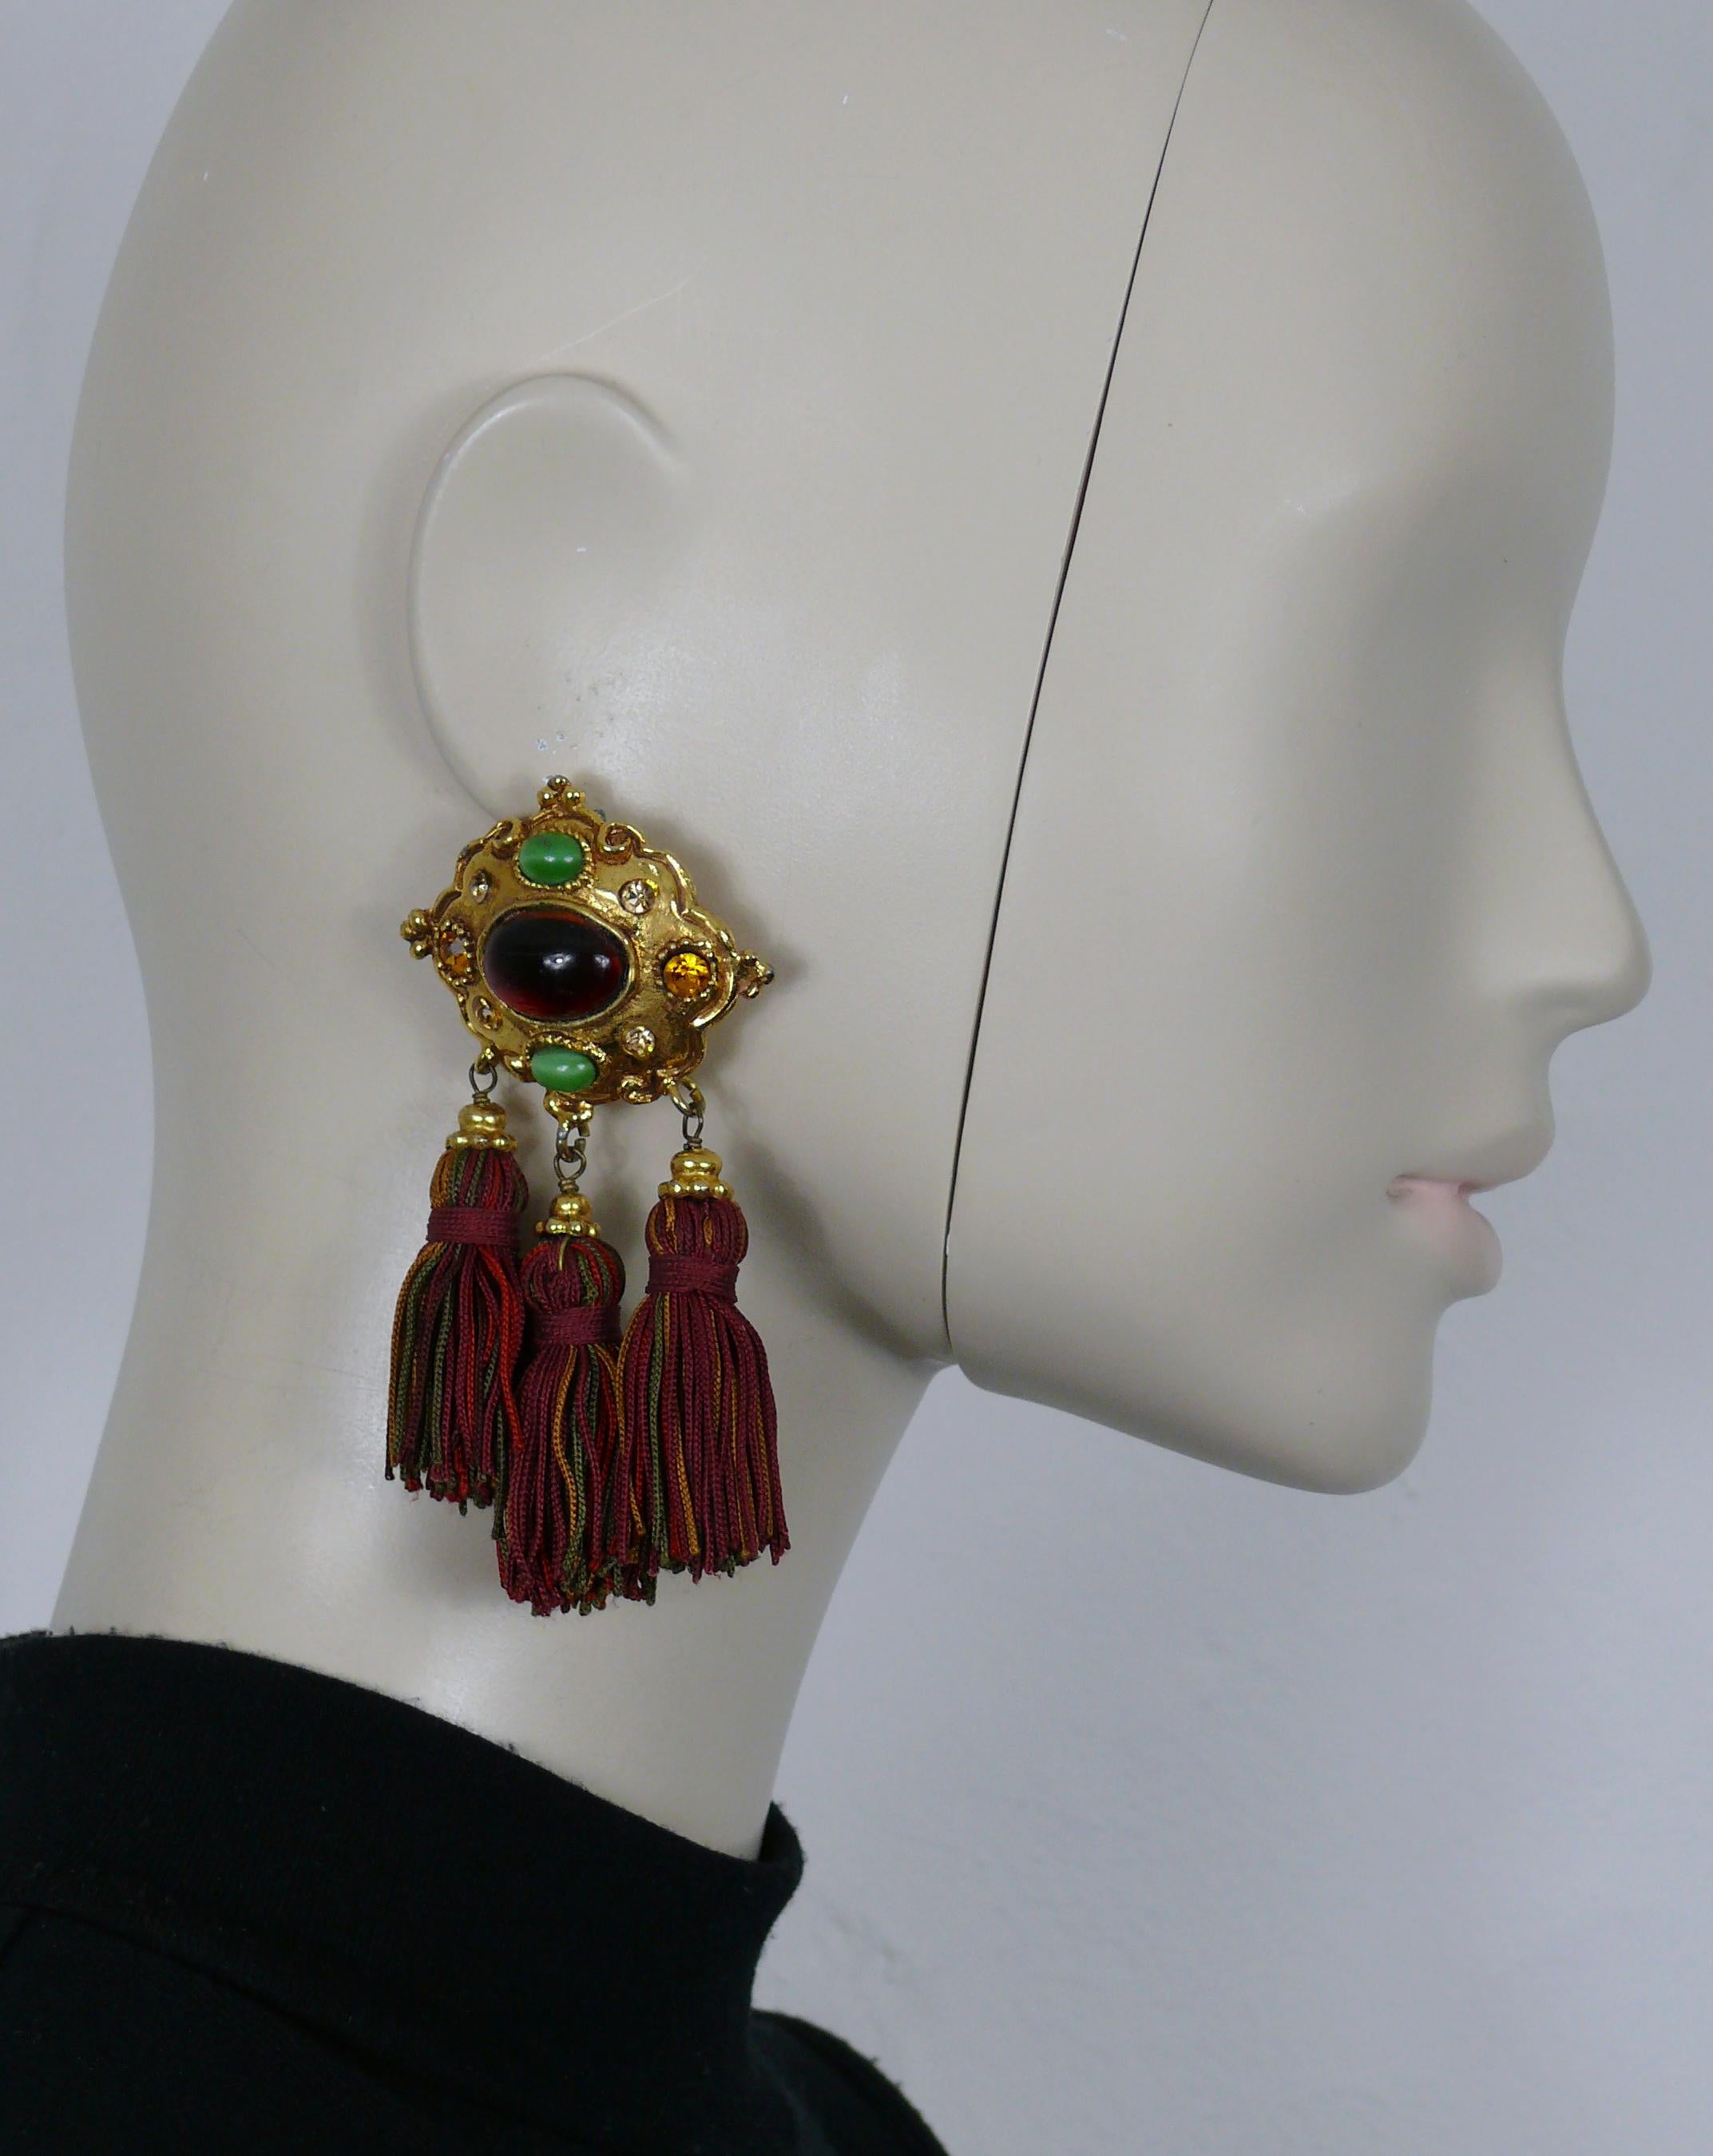 CHRISTIAN LACROIX vintage gold tone dangling earrings (clip-on) embellished with glass cabochons, crystals and three multicolor tassel drops.

Marked CHRISTIAN LACROIX CL Made in France.

Indicative measurements : max. height approx. 9.5 cm (3.74